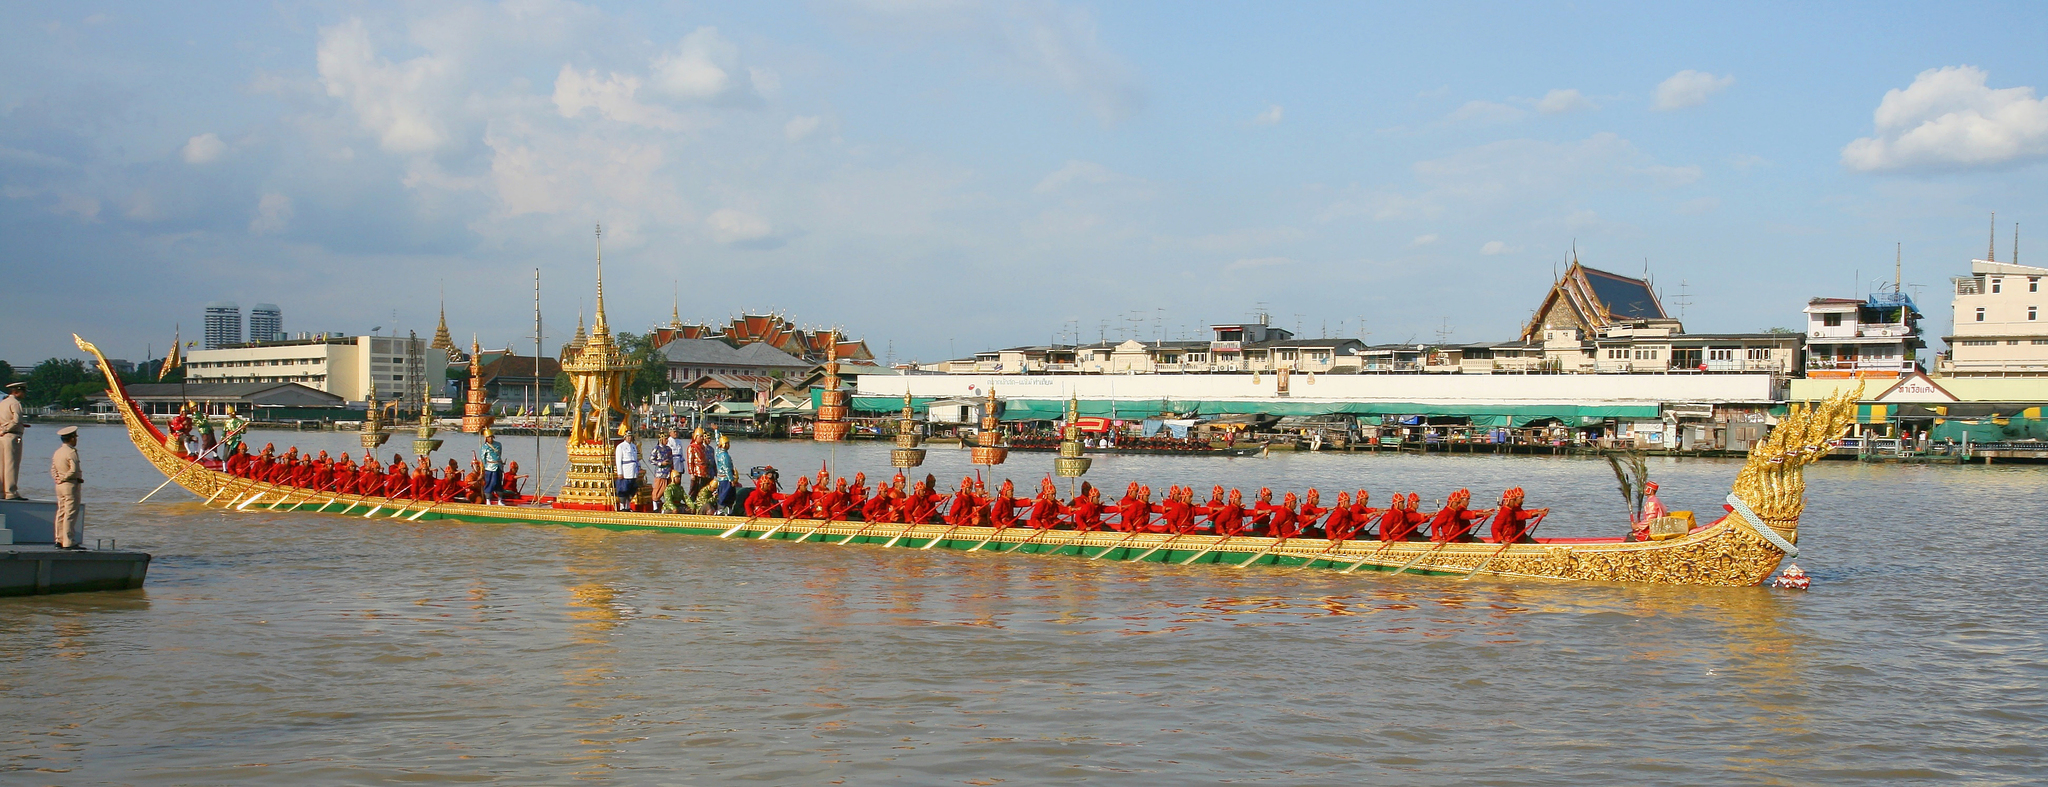 River ceremonial transport of the kings of Thailand - Thailand, Traditions, Barge, Video, Longpost